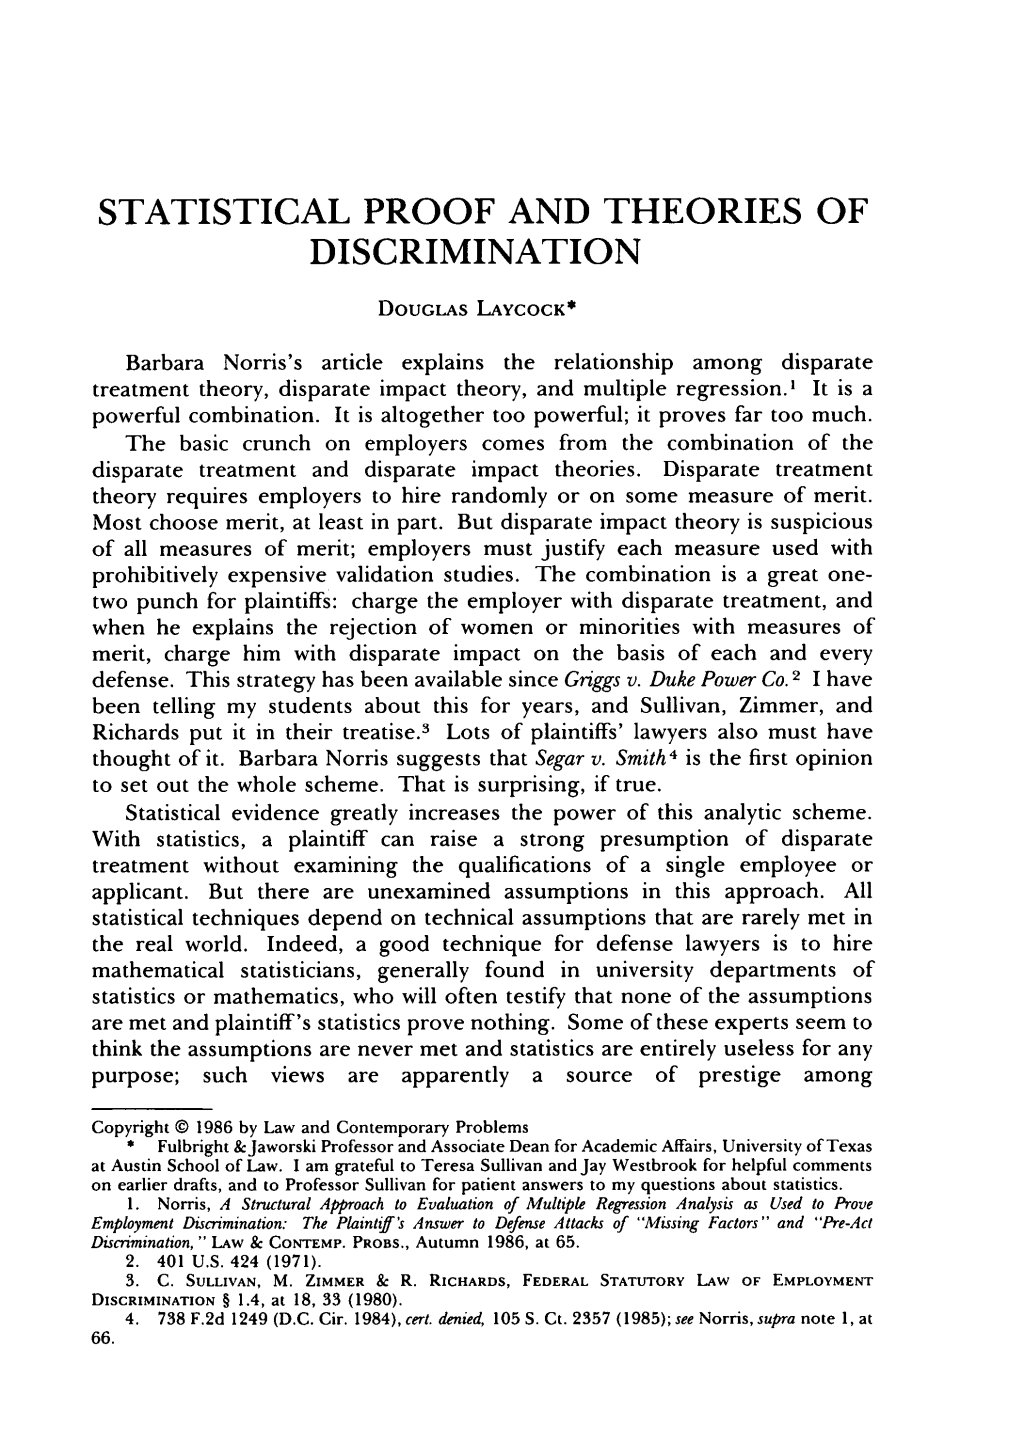 Statistical Proof and Theories of Discrimination